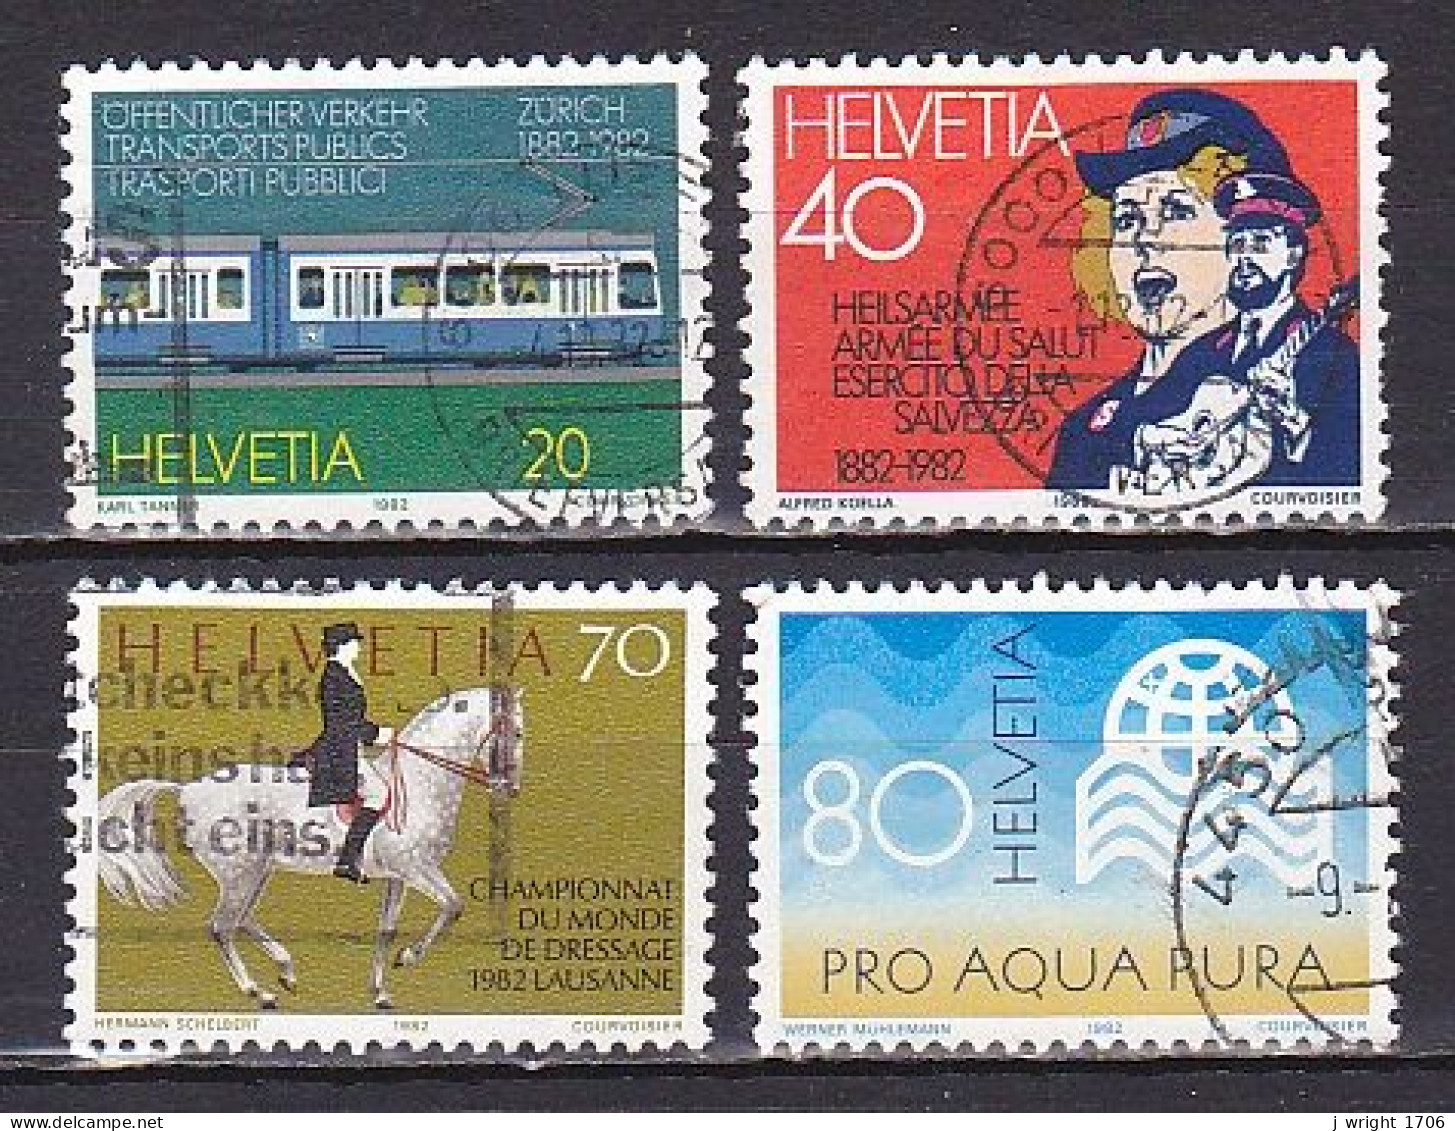 Switzerland, 1982, Publicity Issue, Set, USED - Used Stamps